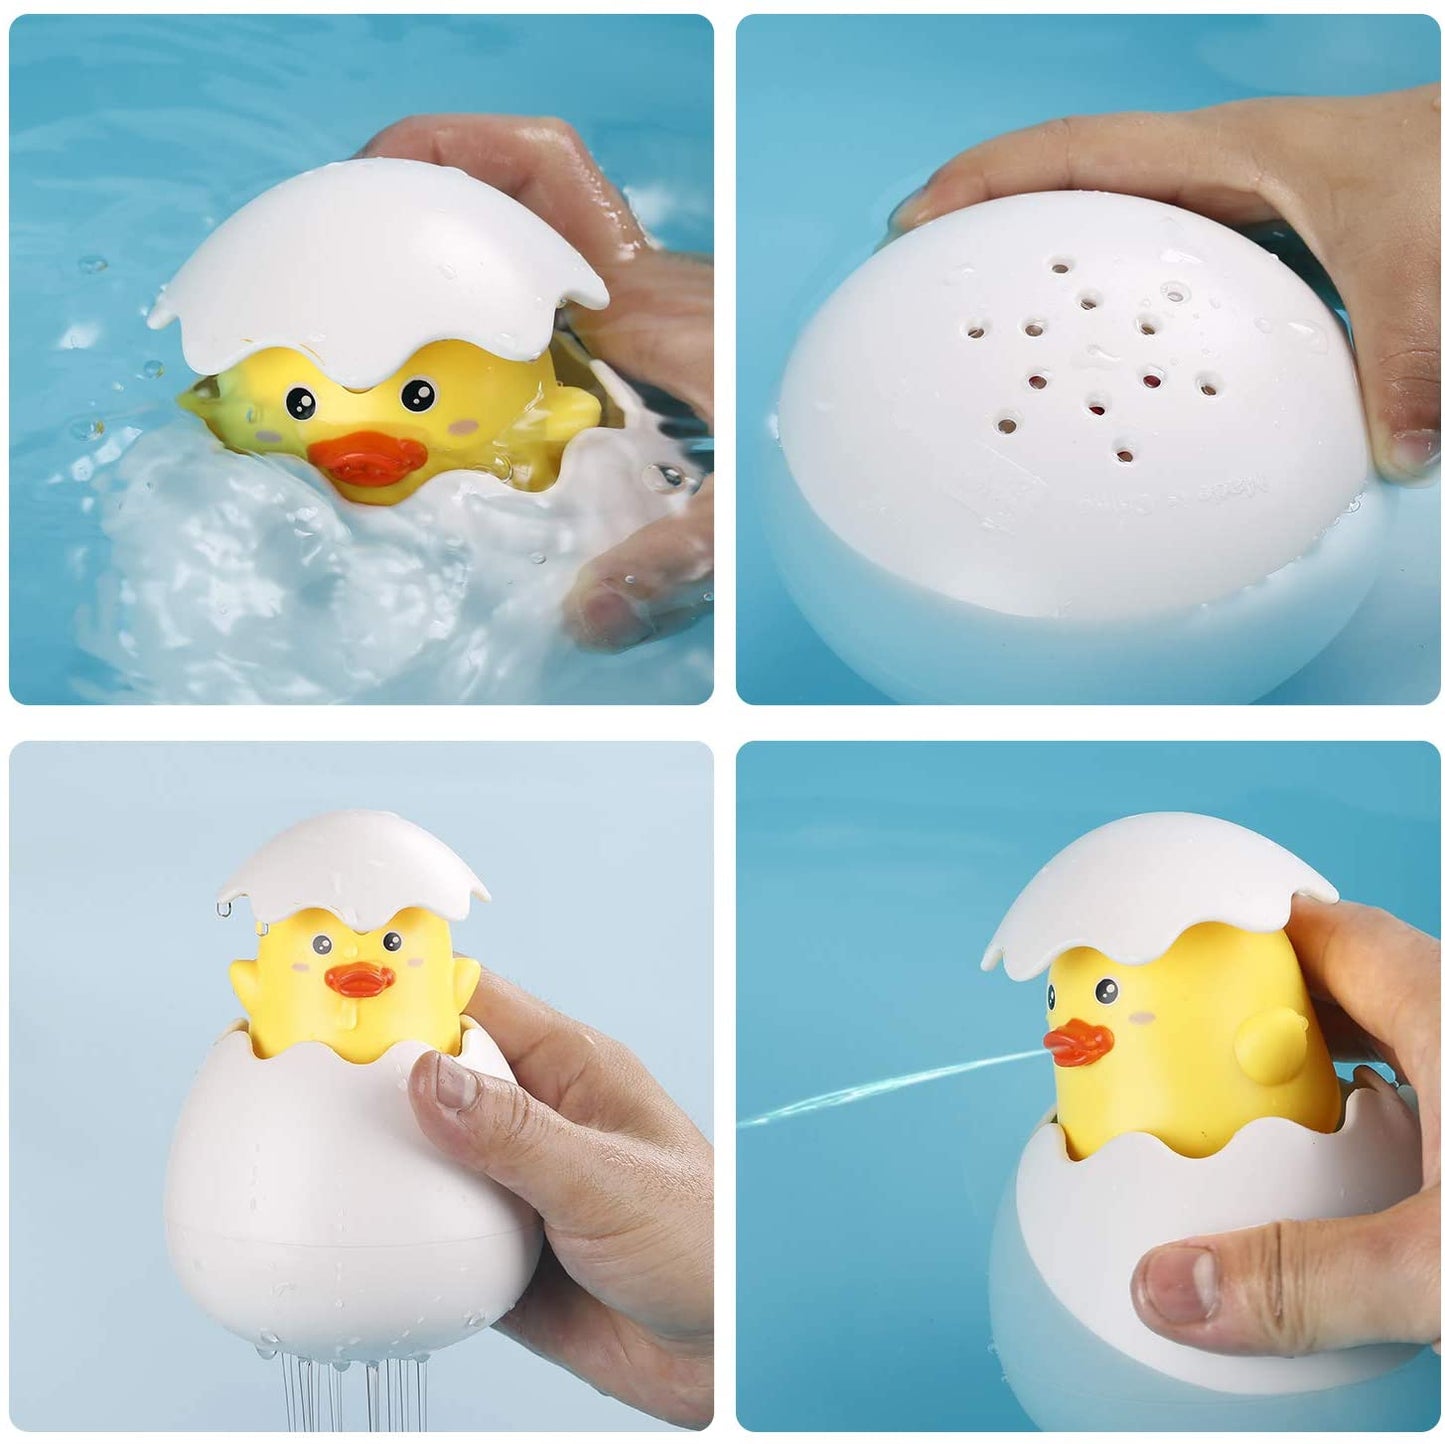 This is a BABY BATHING TOY